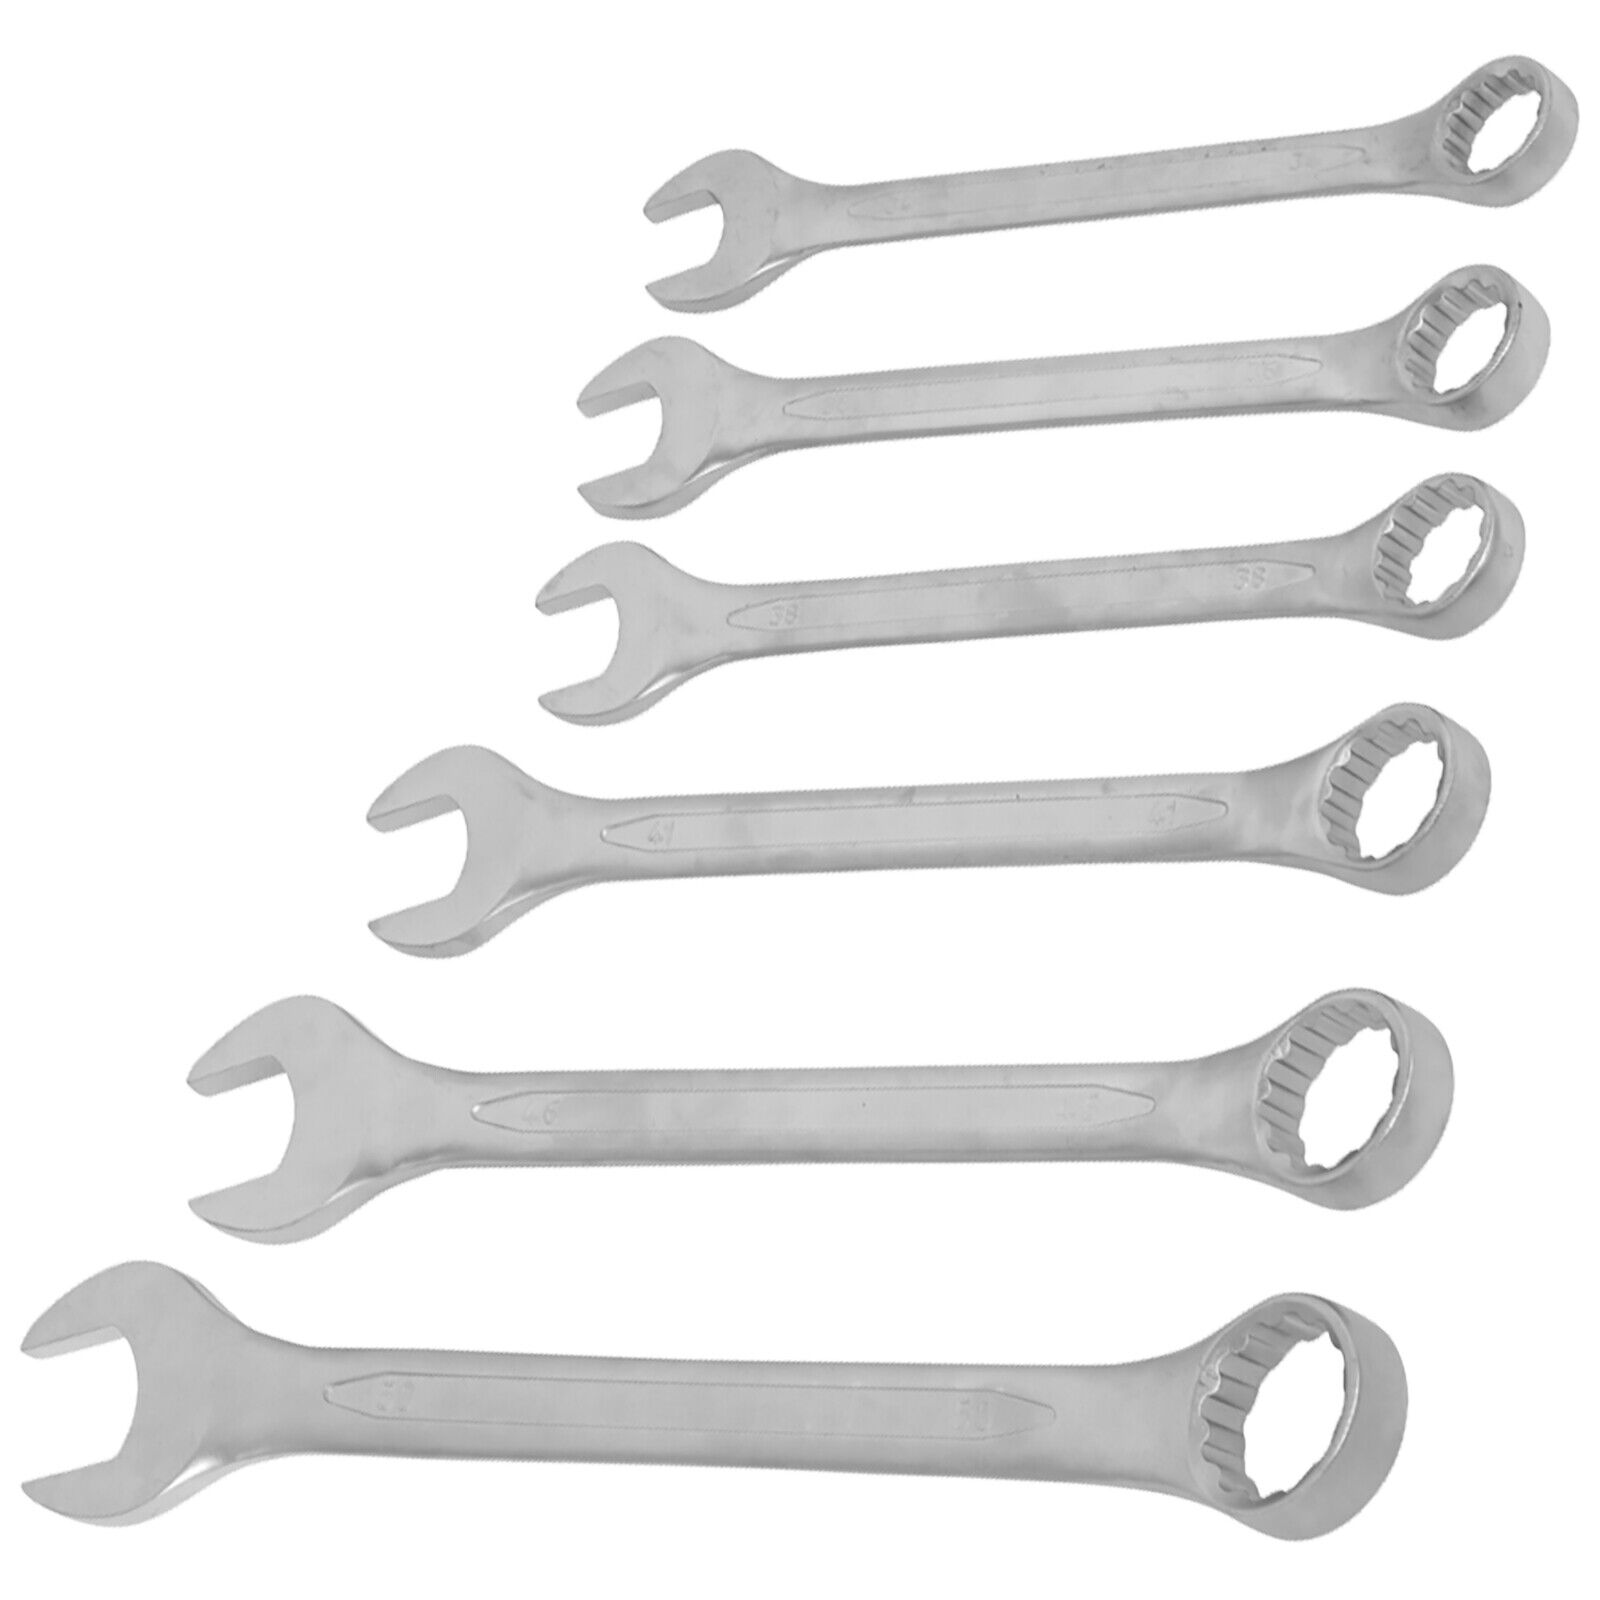 Sealey Jumbo Combination Spanner Set 6pc Metric 34-50mm Open End Ring Wrench  5054511847970 eBay